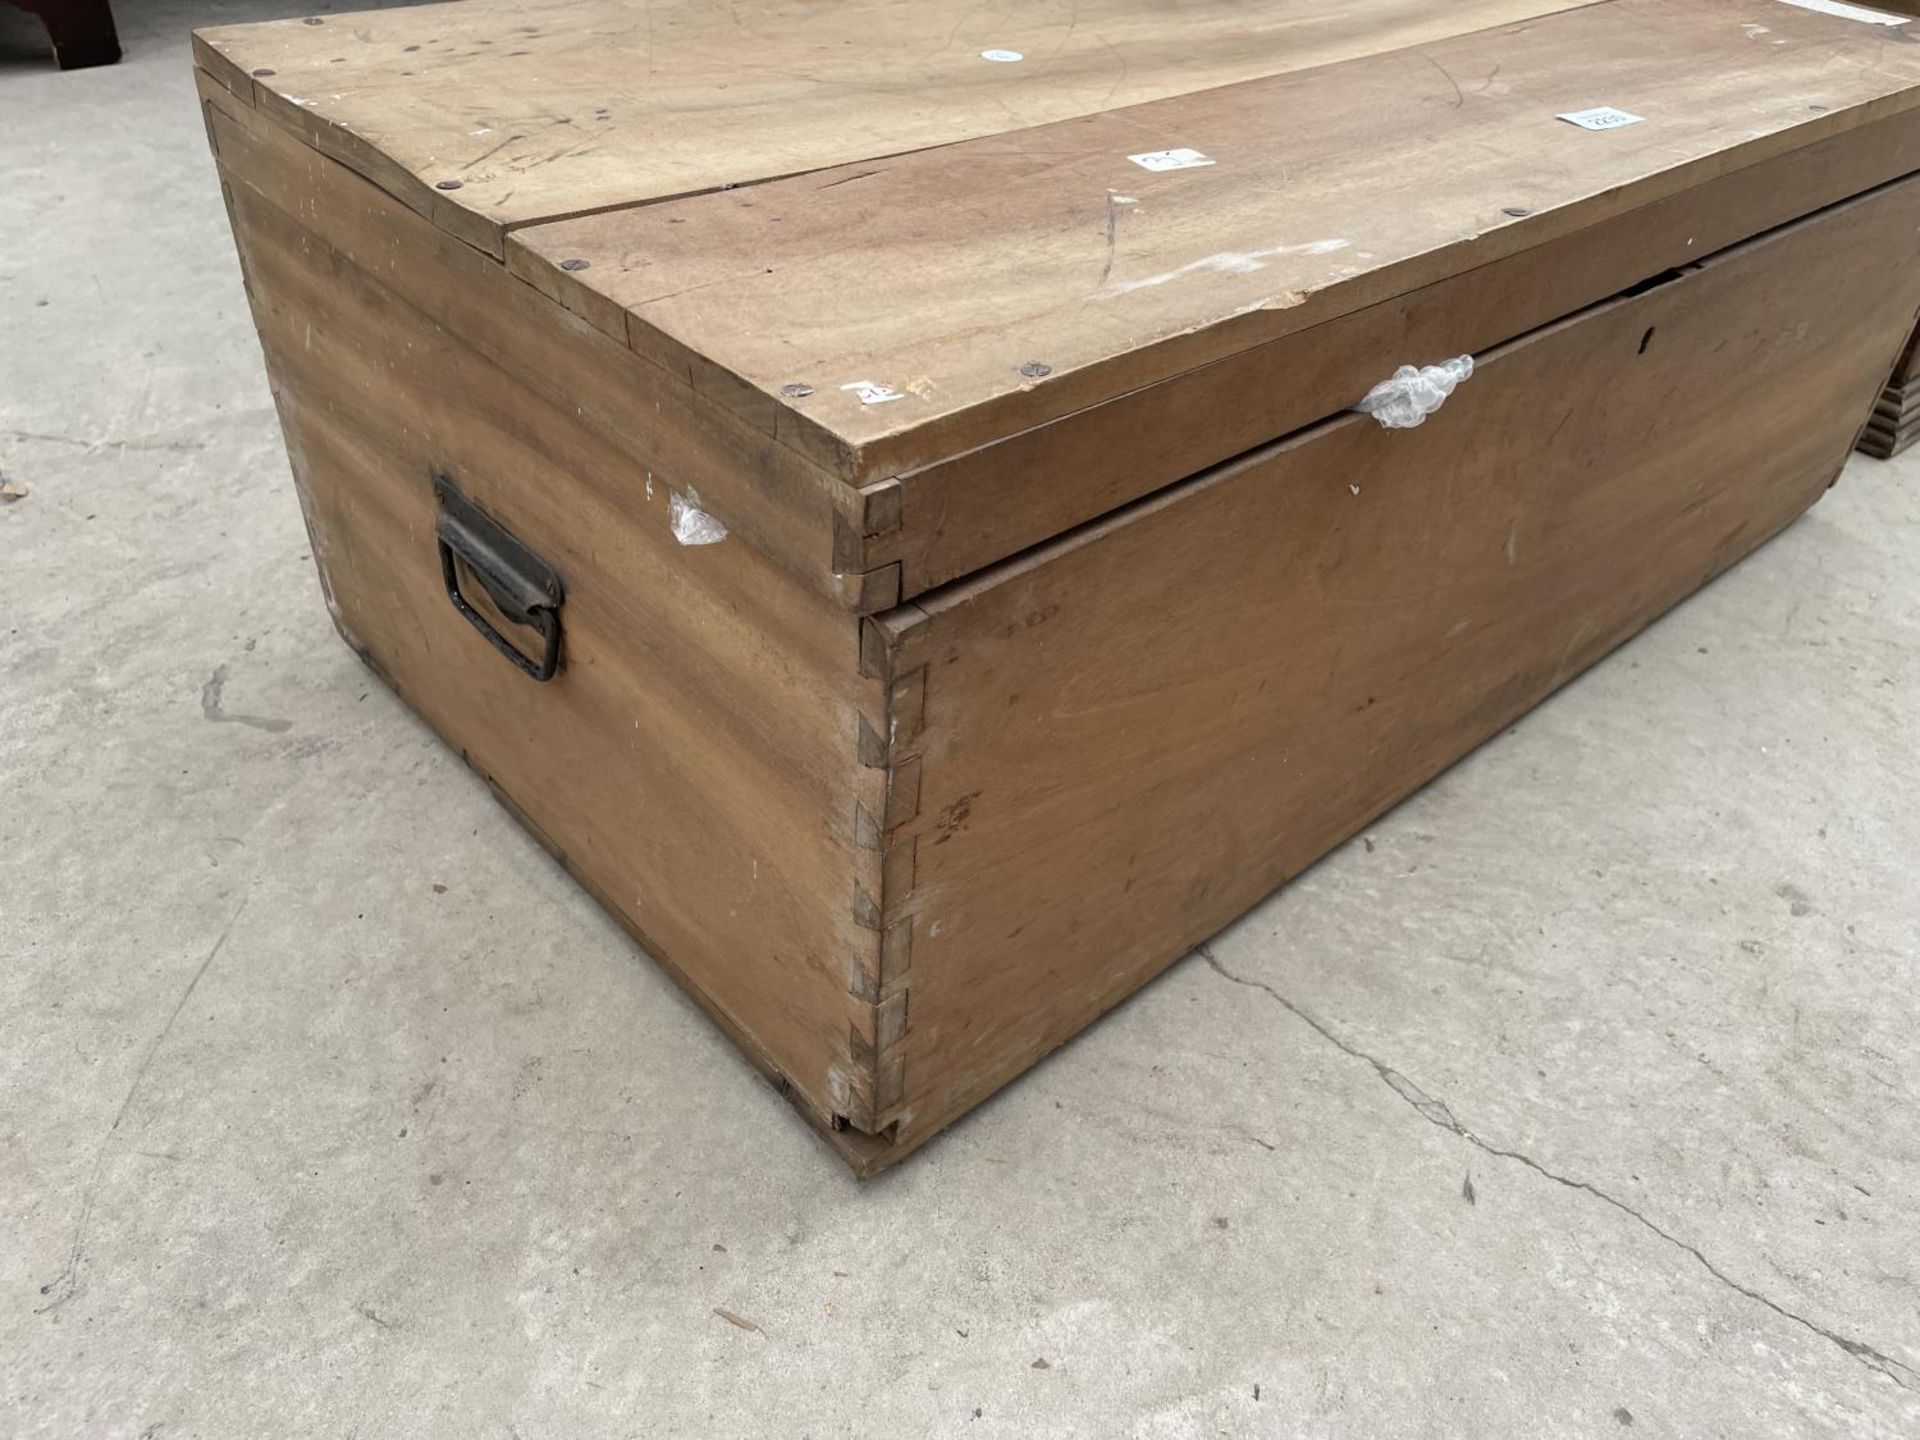 A HARDWOOD TRUNK WITH METALWARE CARRYING HANDLE - Image 3 of 4